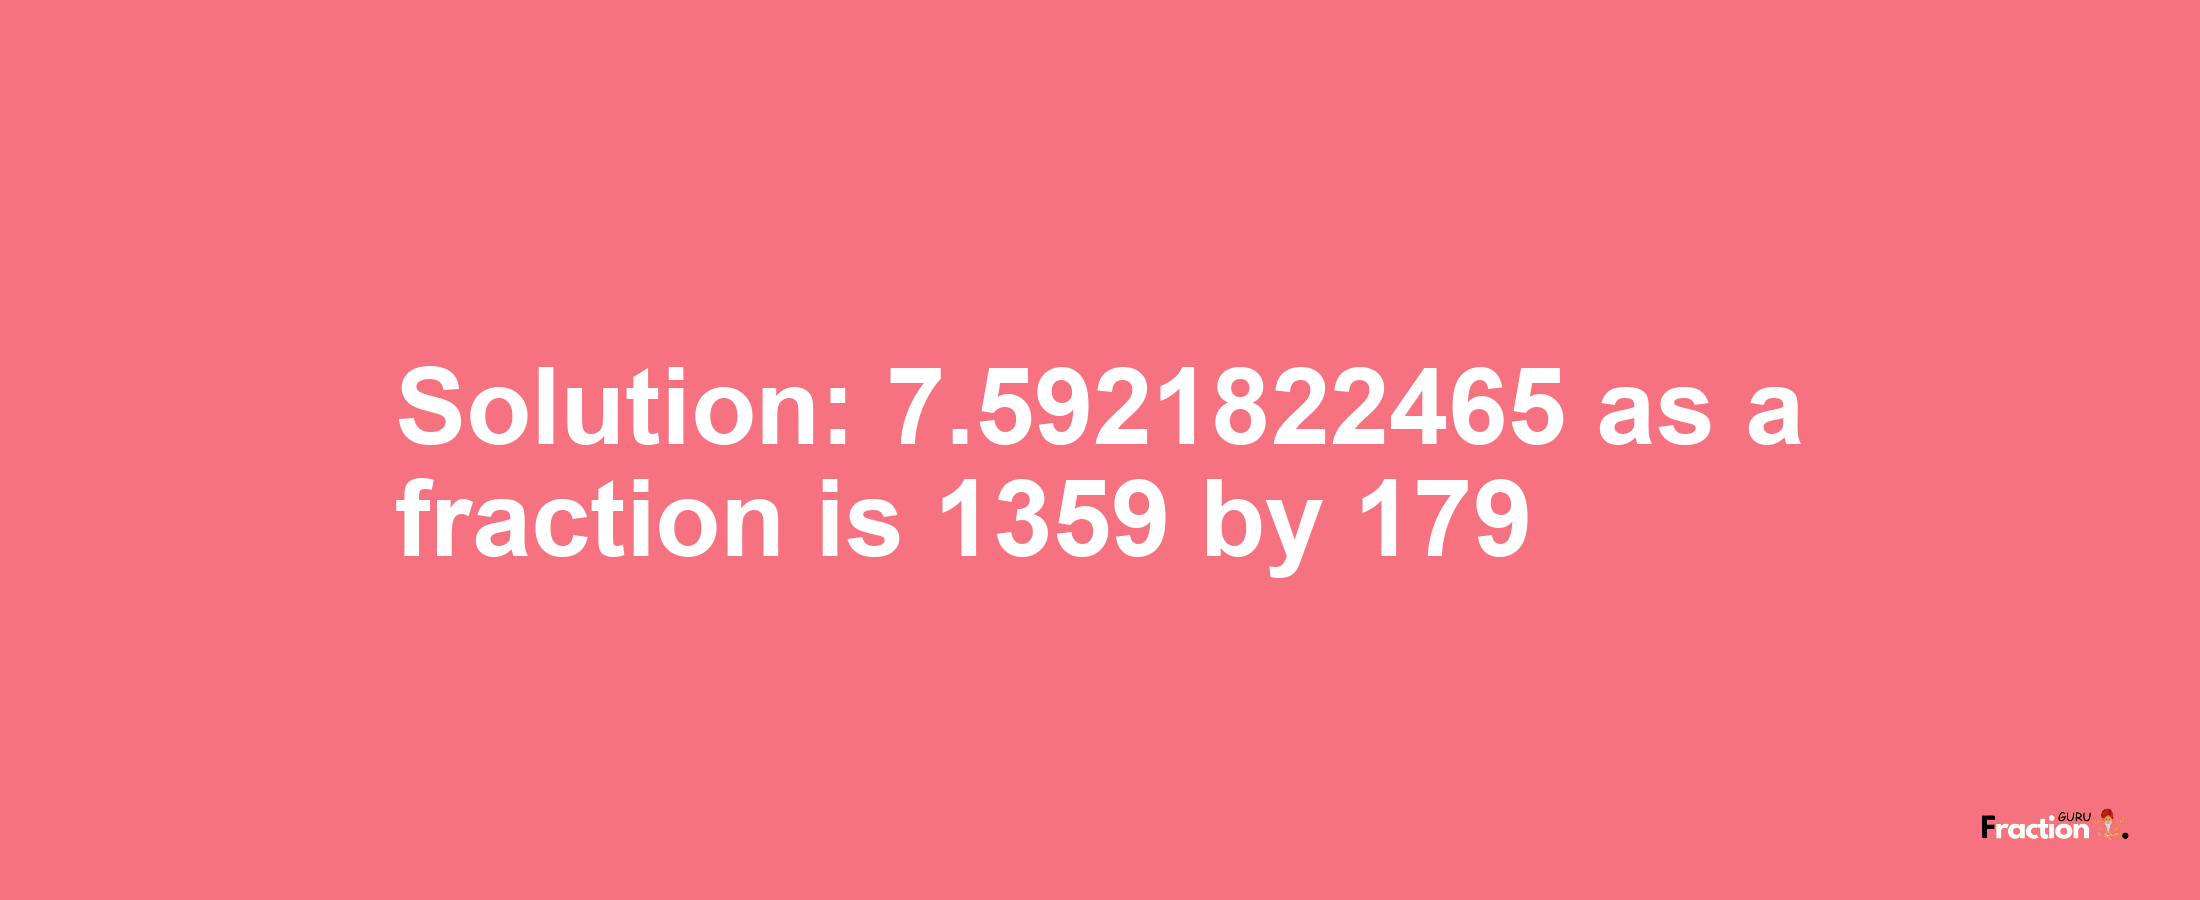 Solution:7.5921822465 as a fraction is 1359/179